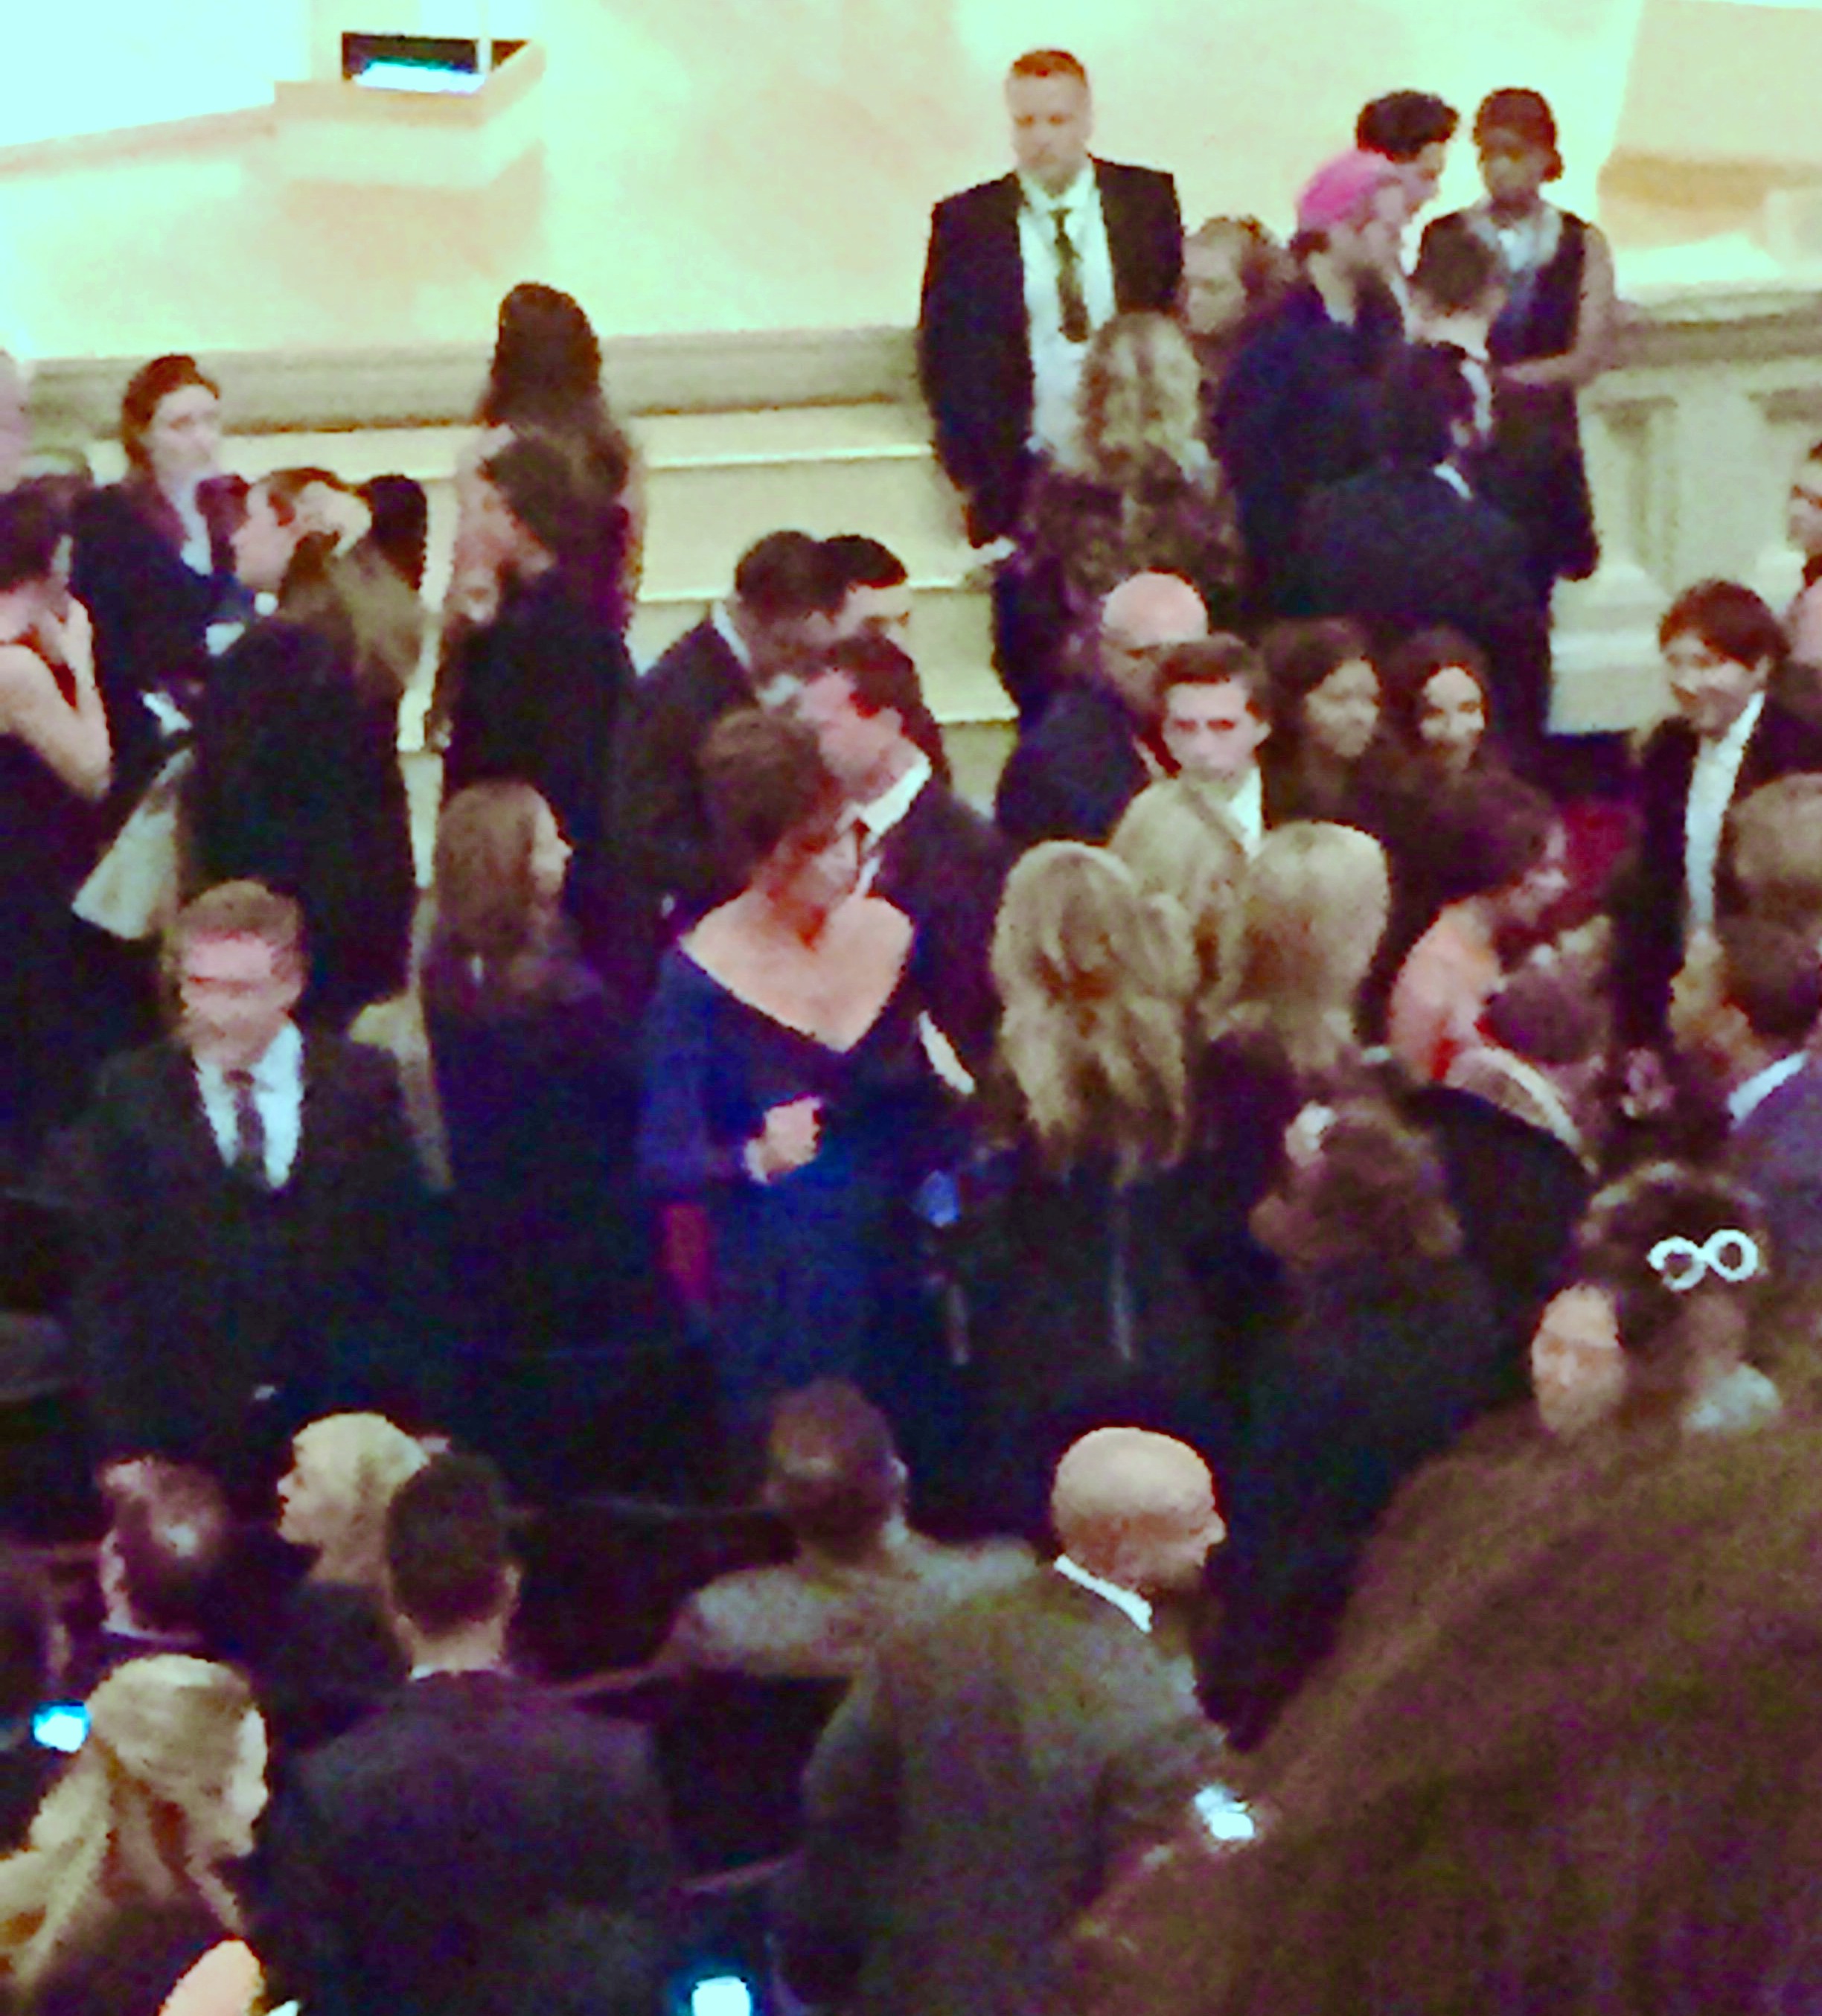 Caitlyn Jenner (in blue) in the distant crowd.jpg